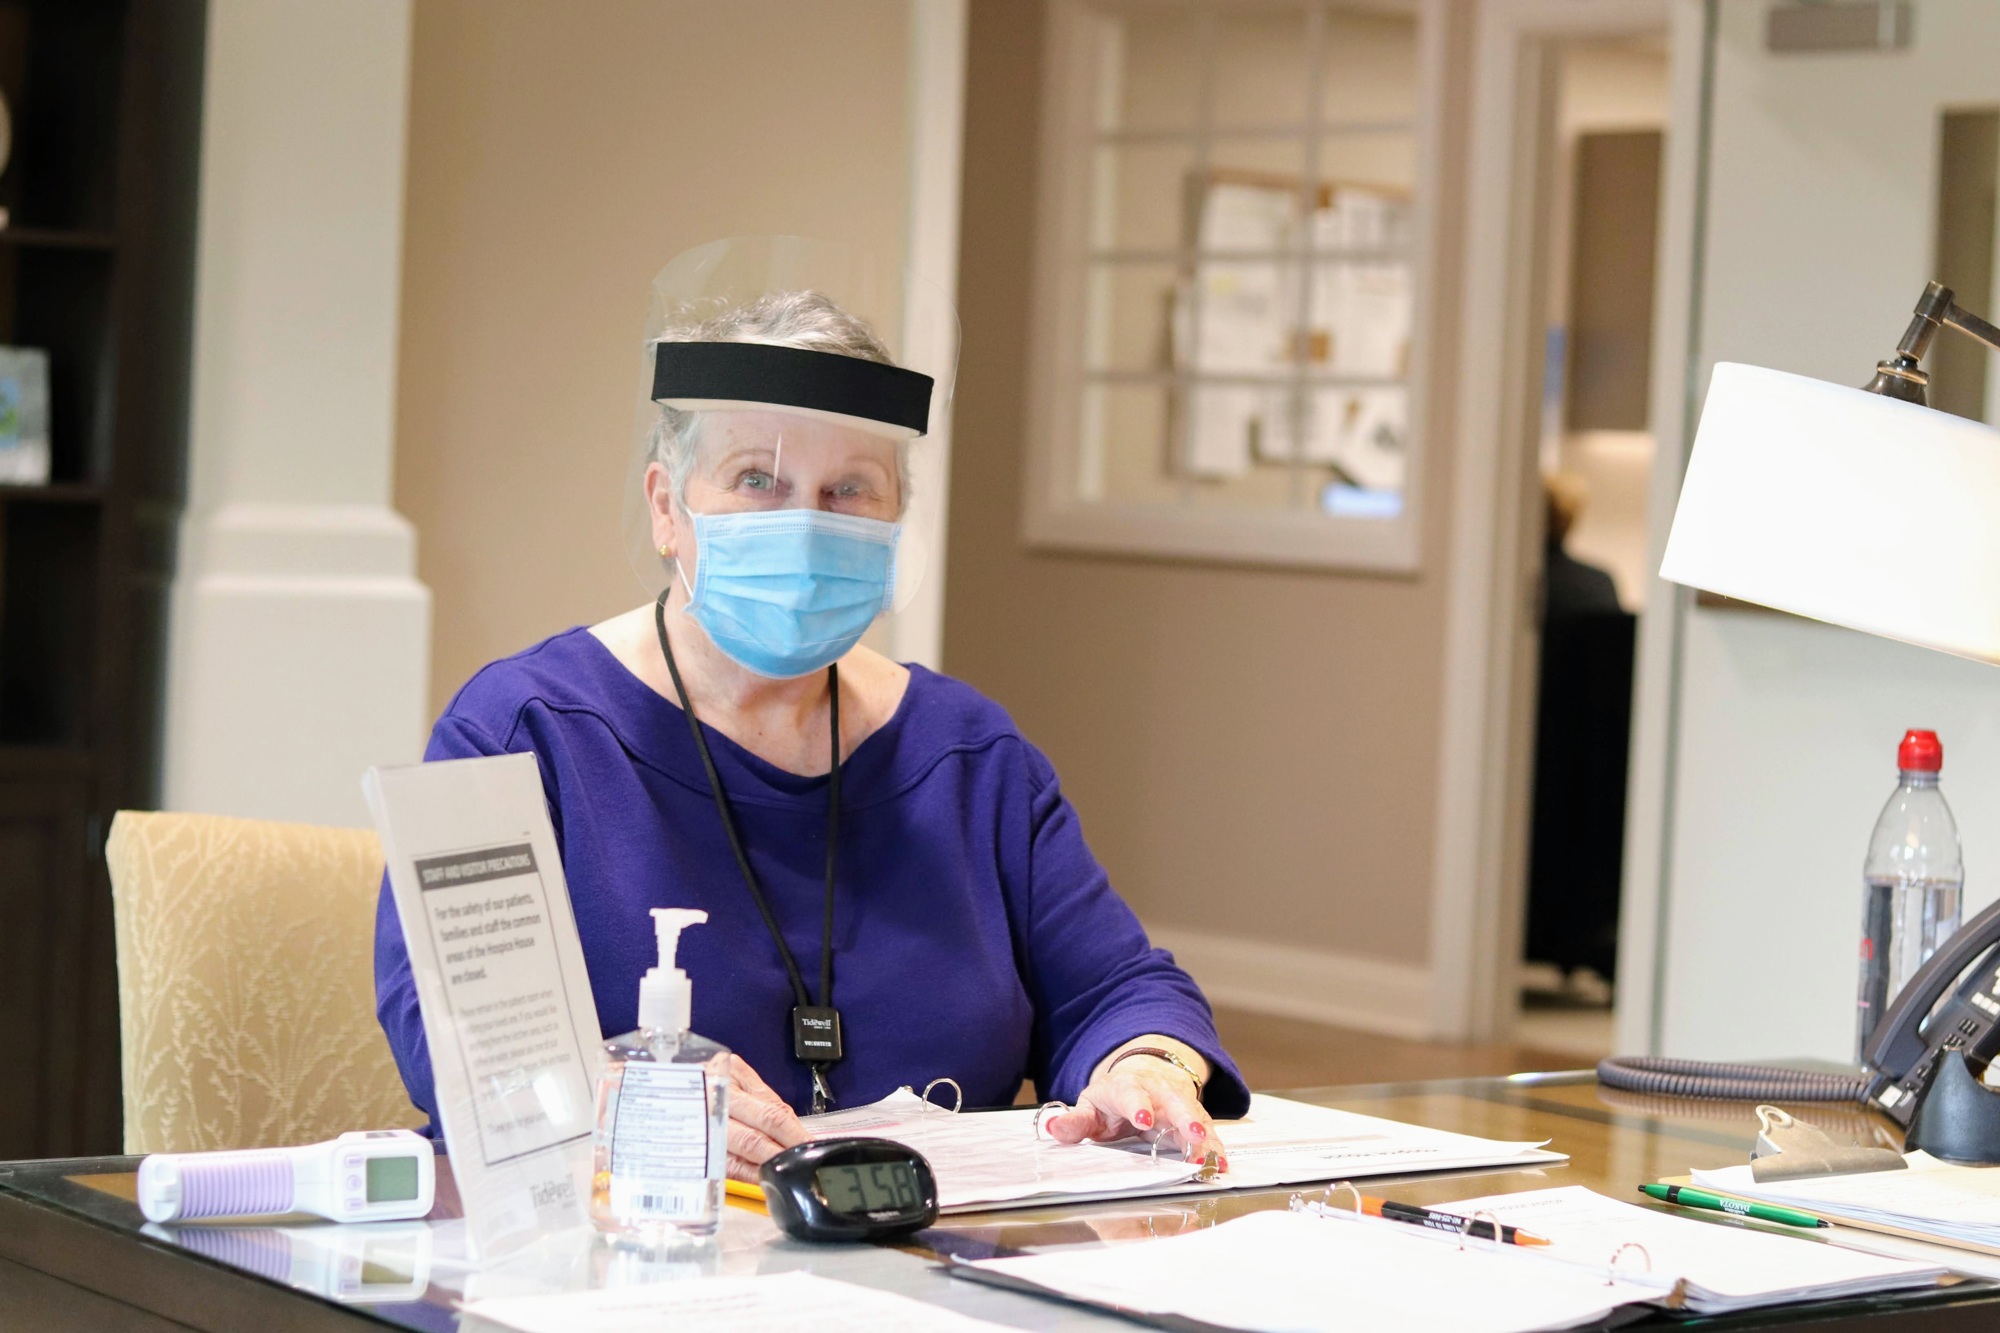 Lynda Anderson works as a host, taking temperatures and enforcing visitor restrictions, during the early months of 2021. She has finally started working in her preferred role of patient support once more. Courtesy photo.